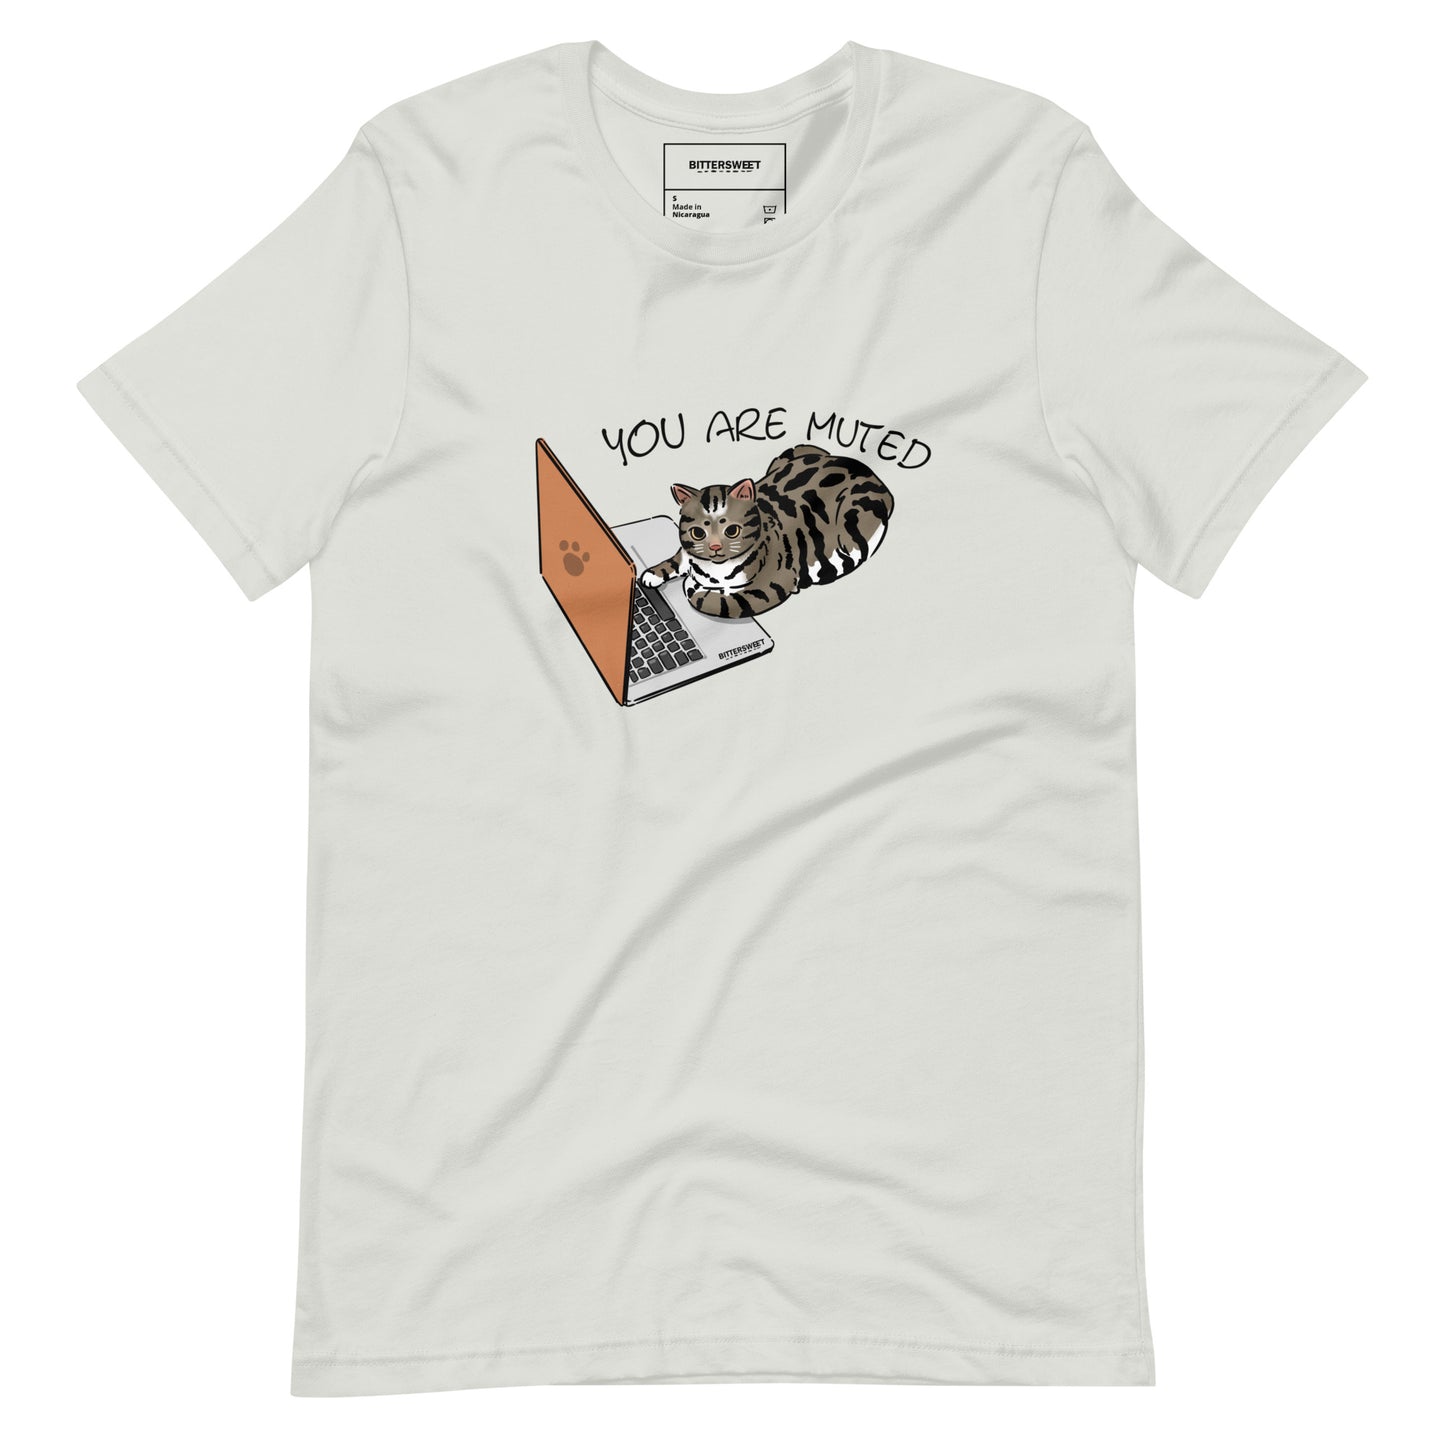 You are muted cat funny graphic T-shirt